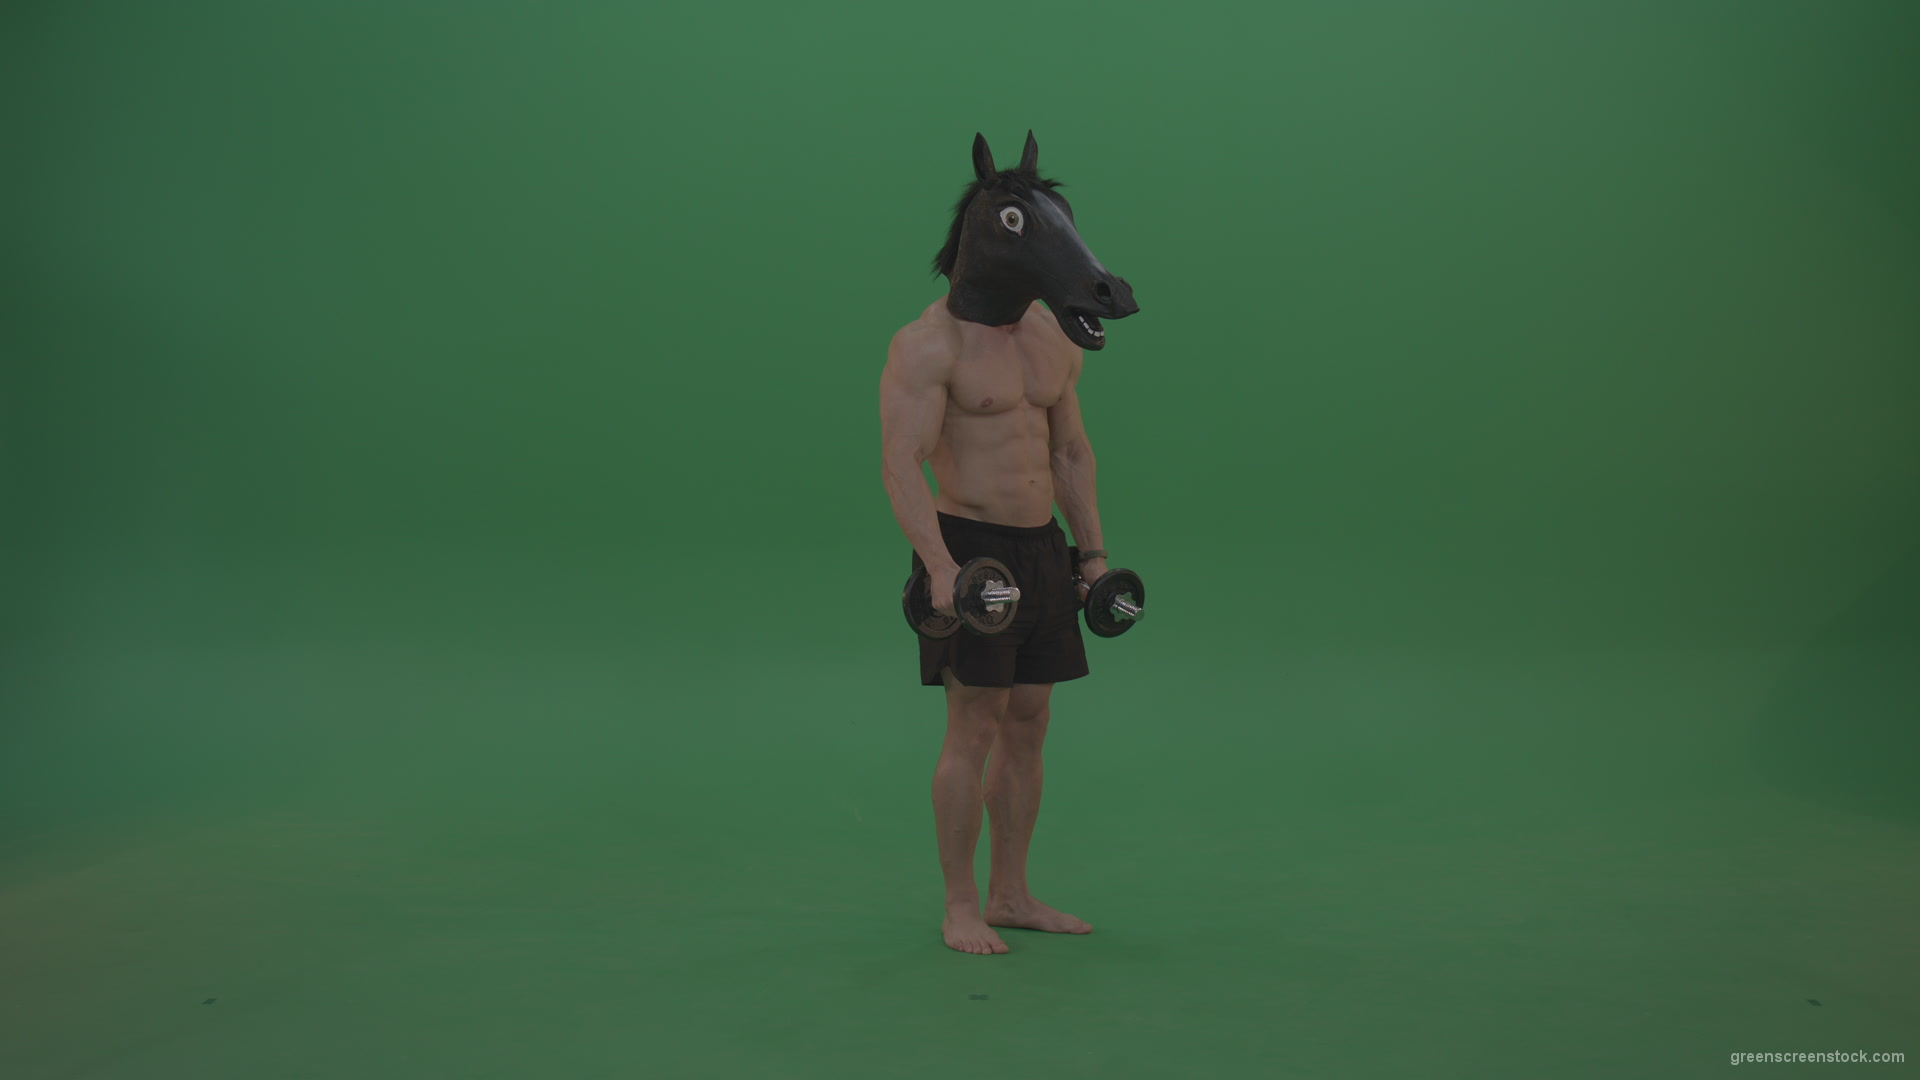 Ripped-man-with-horse-head-lifts-dumbells-over-chromakey-background_004 Green Screen Stock